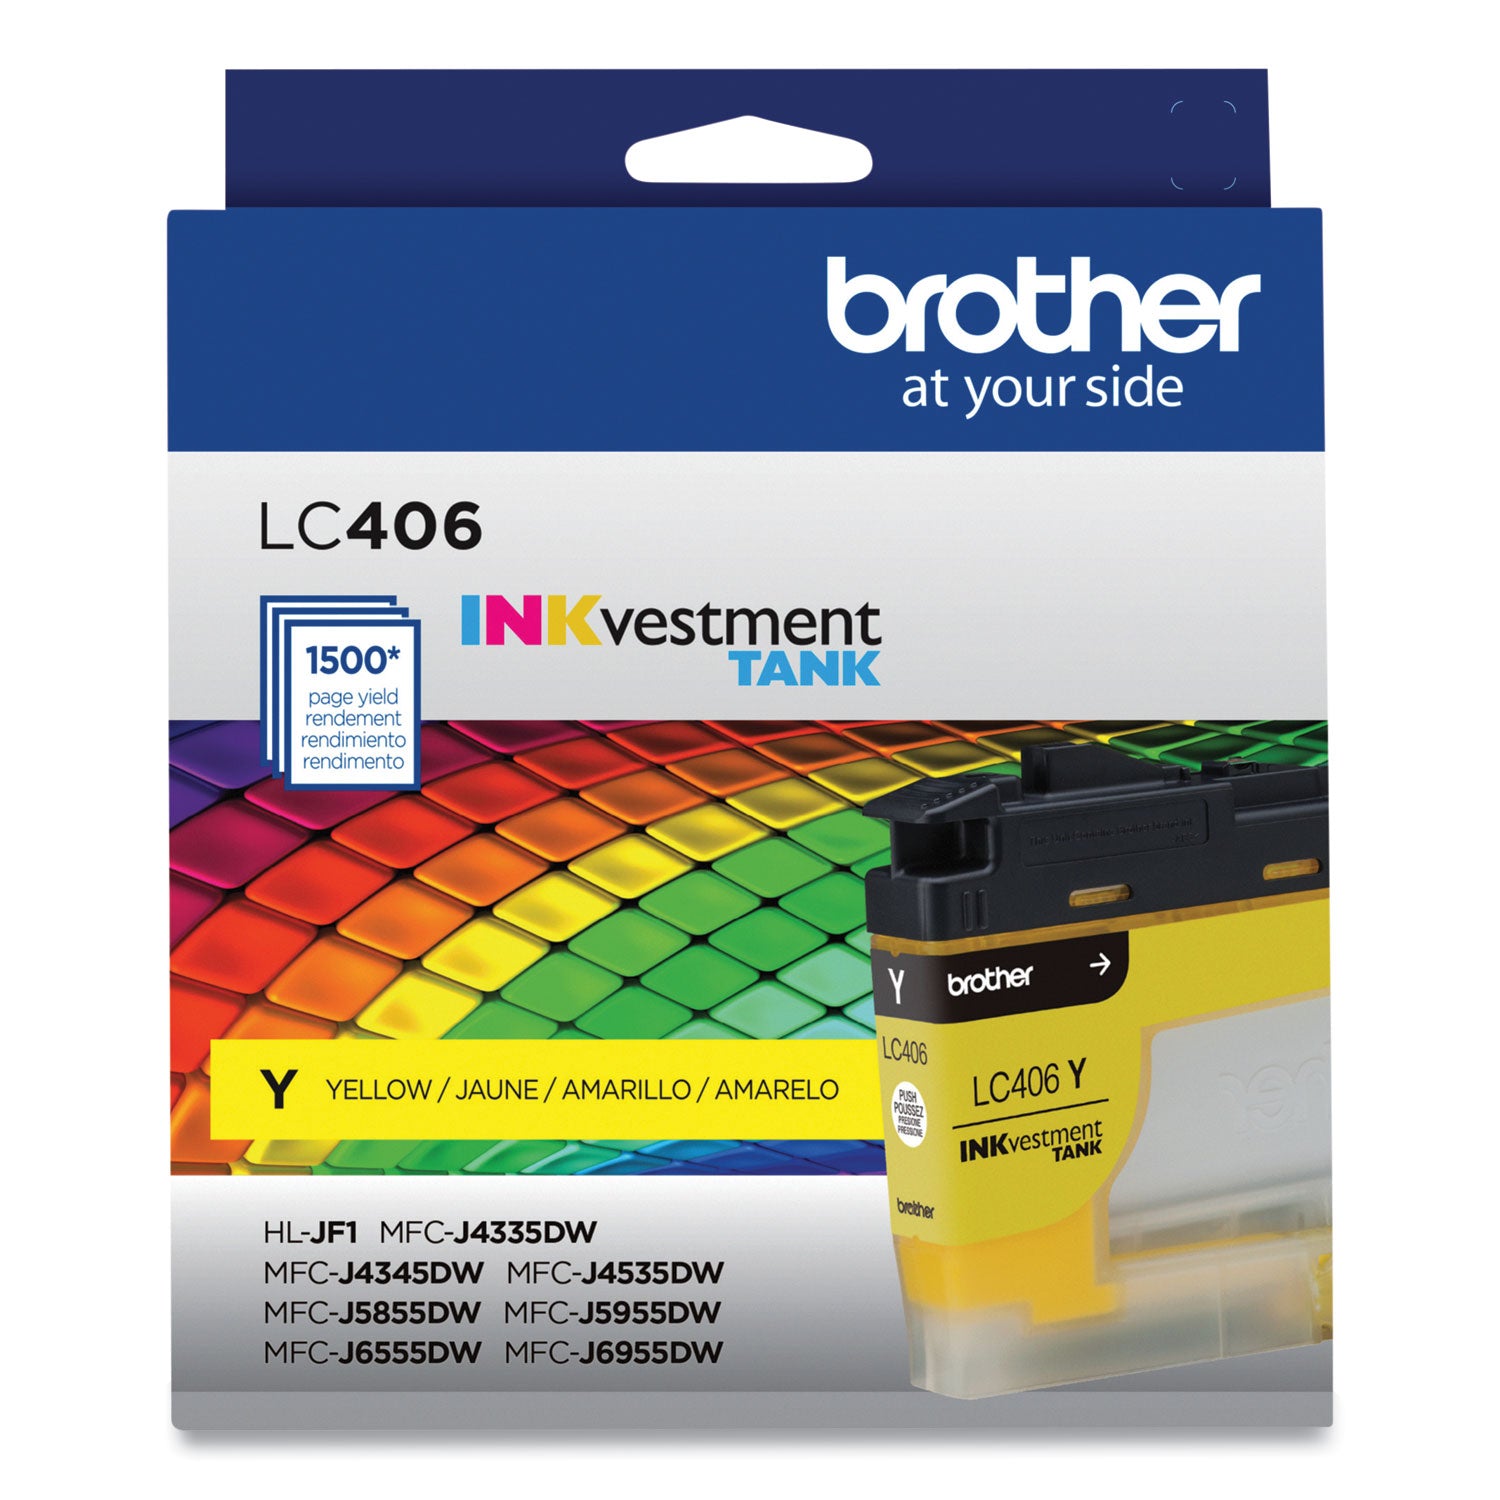 lc406ys-inkvestment-ink-1500-page-yield-yellow_brtlc406ys - 1